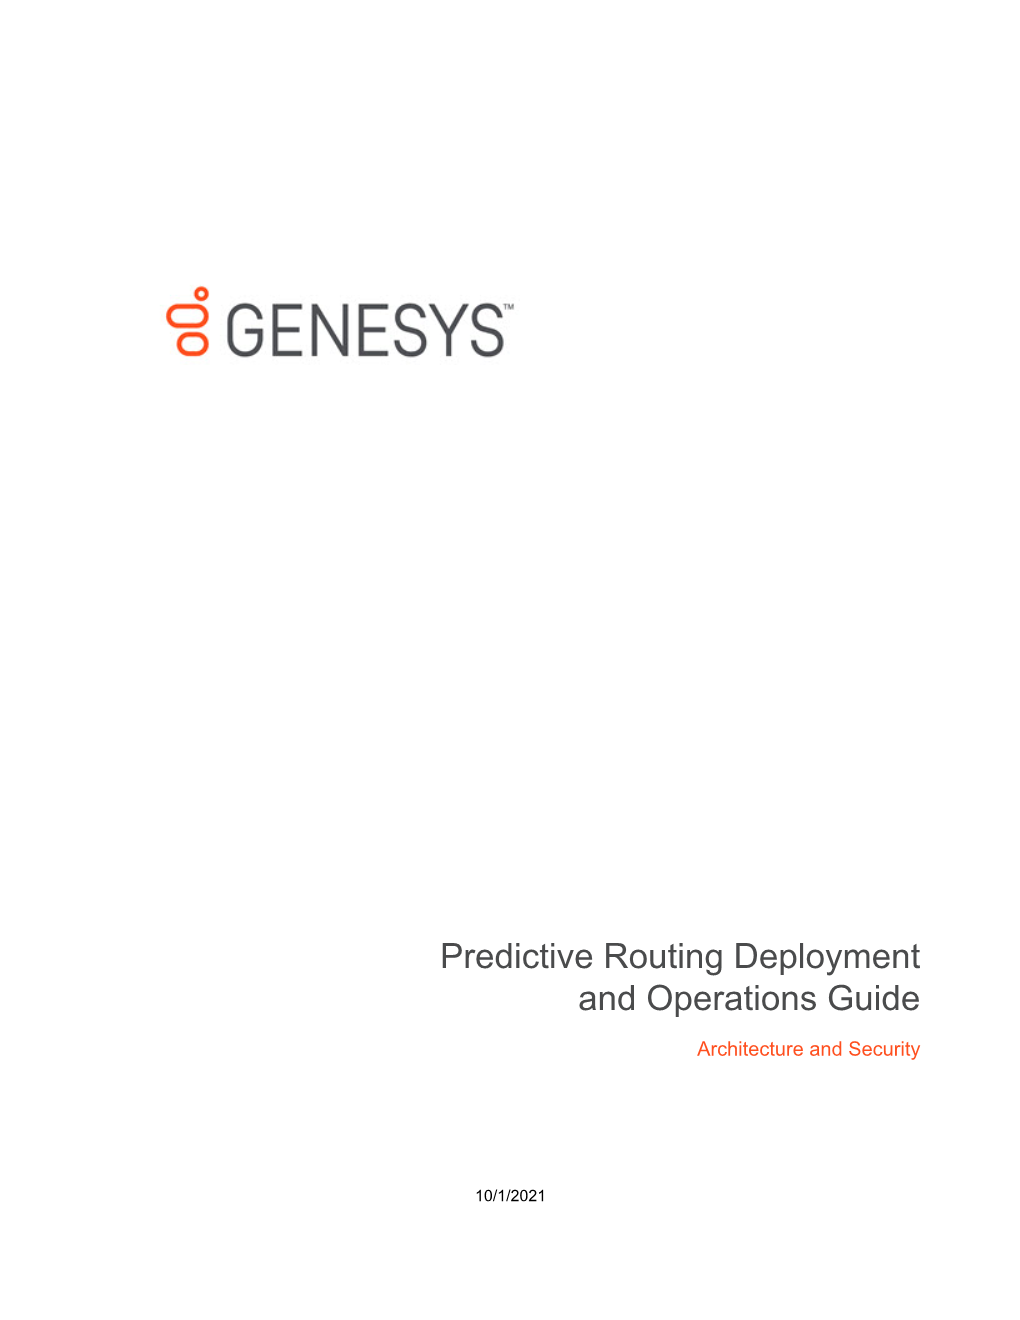 Predictive Routing Deployment and Operations Guide